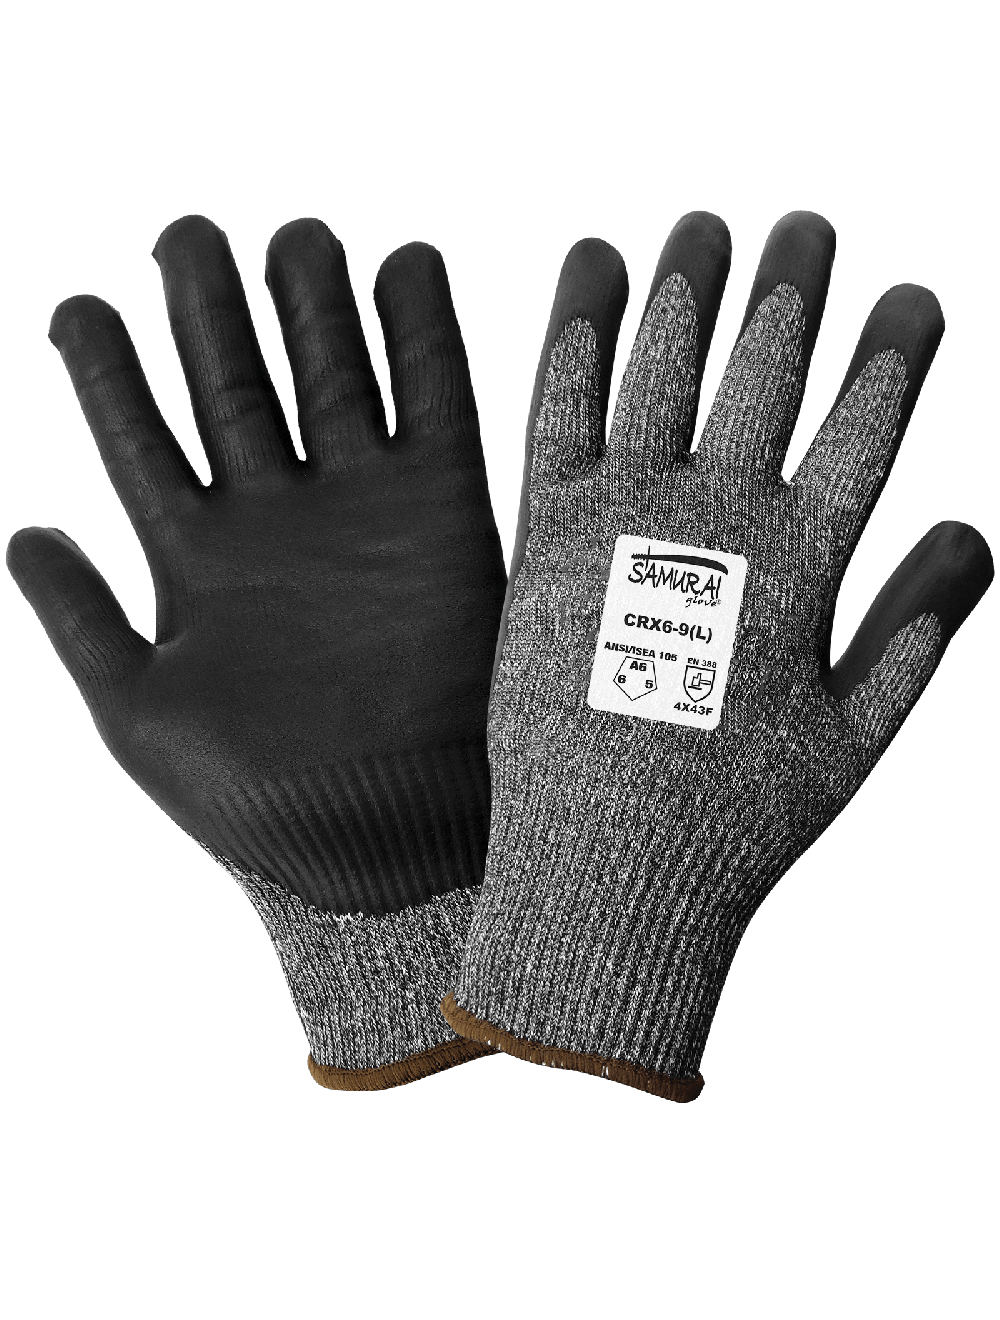 Samurai Glove® Tuffalene® Cut, Abrasion, and Puncture Resistant Foam Nitrile-Coated Palm Gloves - LIMITED STOCK - CRX6